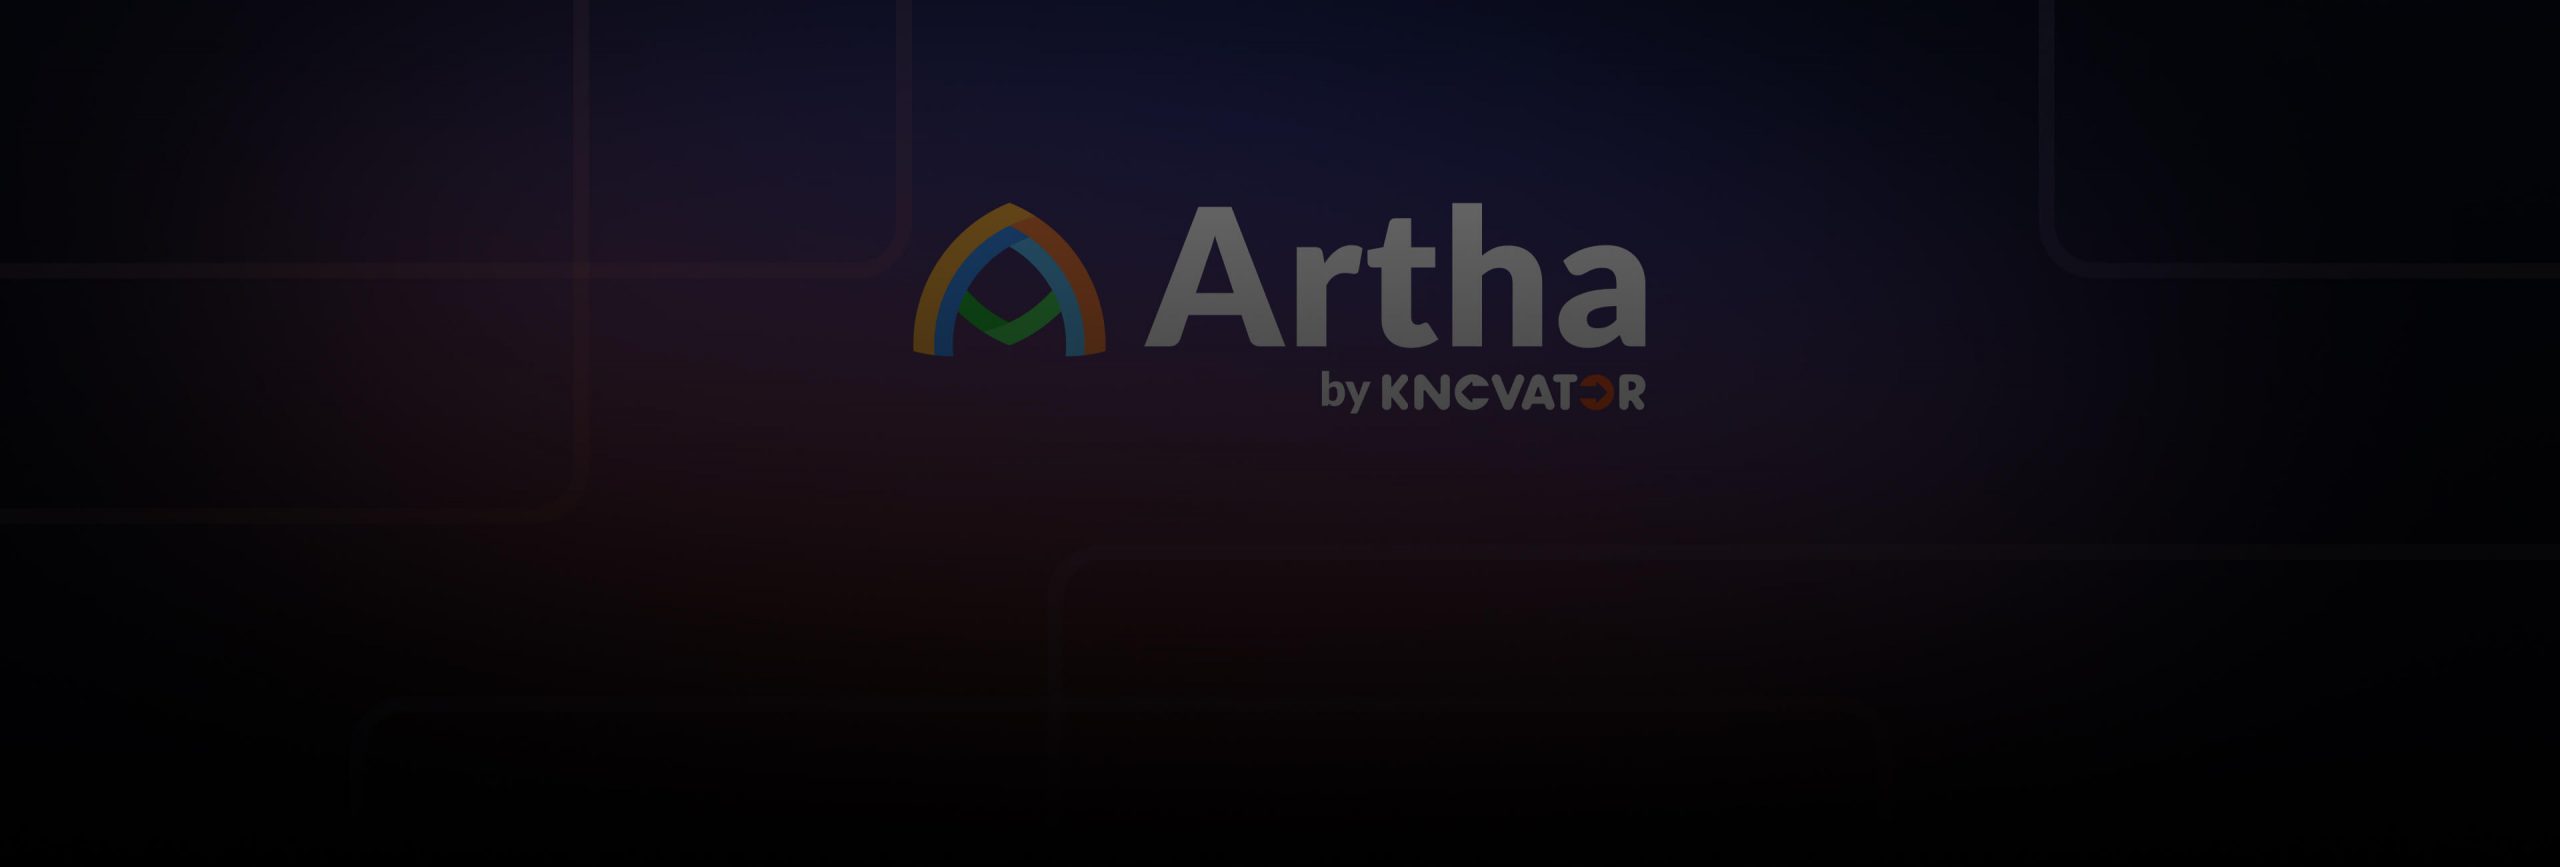 Build a Job Board With Artha To Increase Engagement & Boost Monetization Image